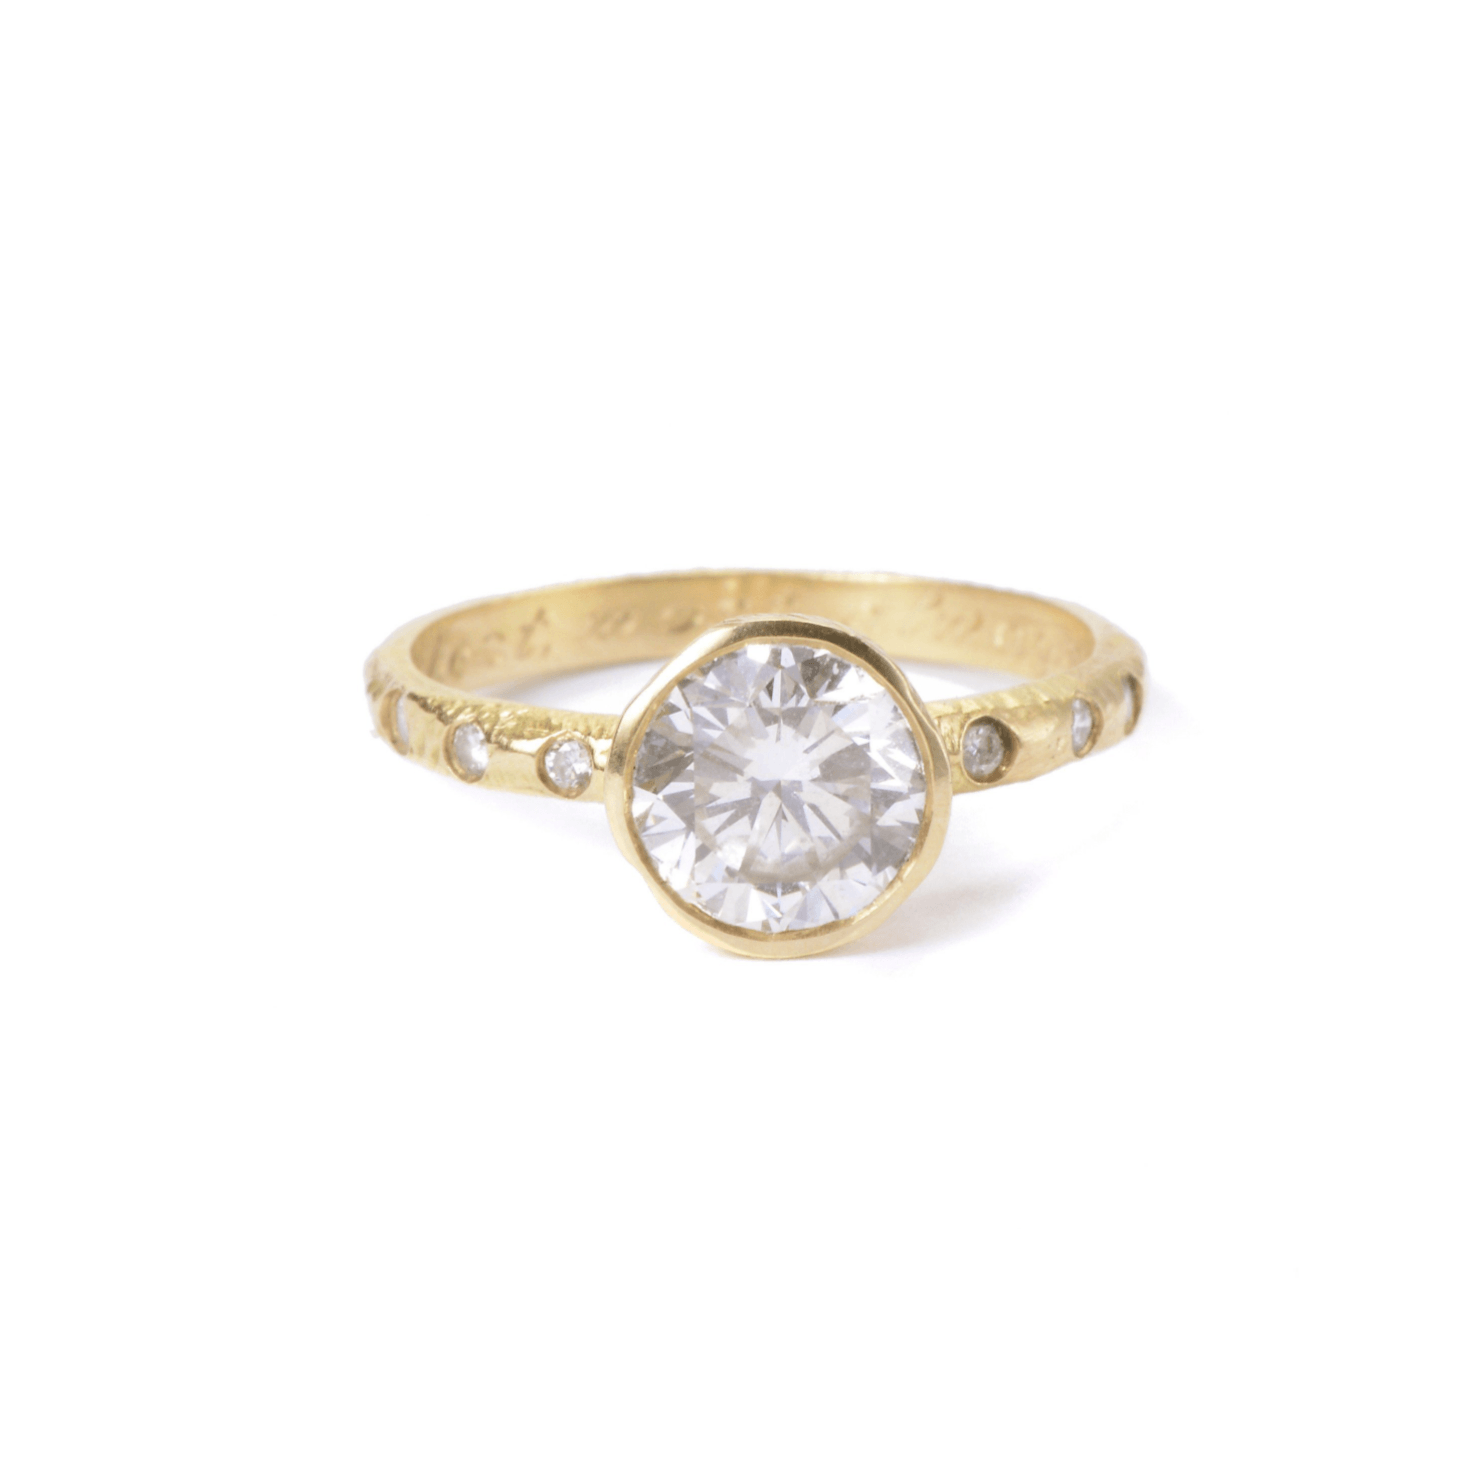 Custom diamond engagement ring with side diamonds and texture. Handmade in 18kt gold in Brooklyn.